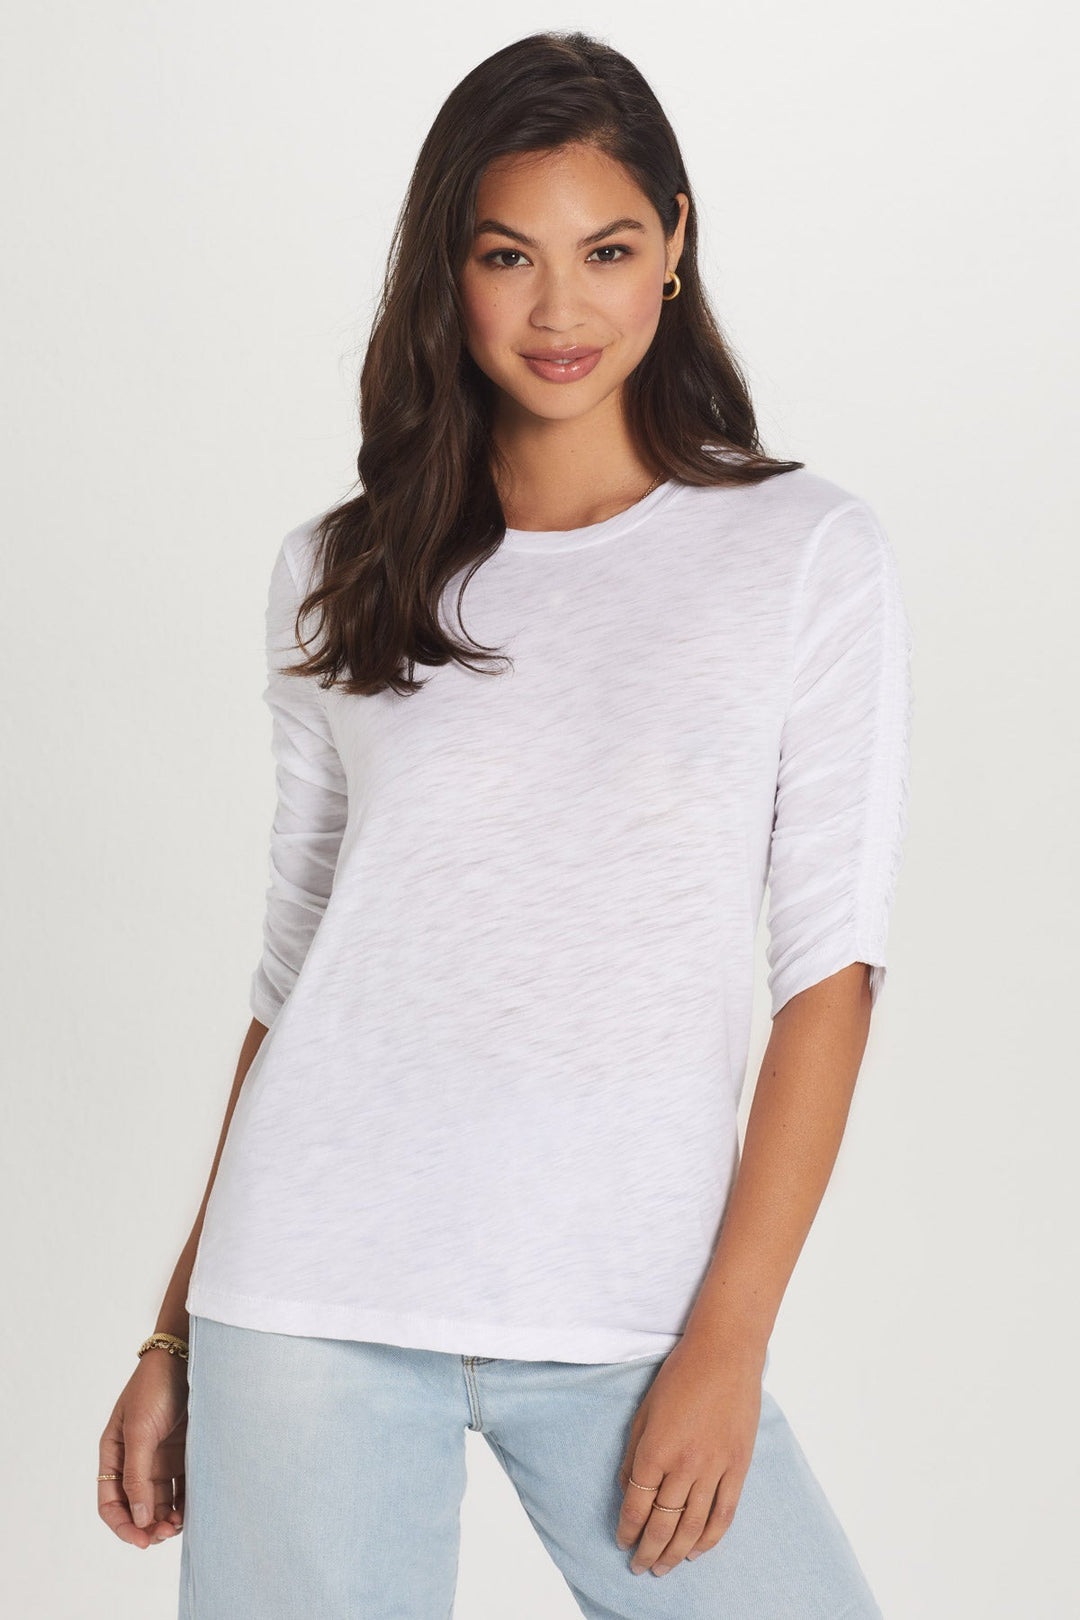 Ruched Half Sleeve Tee in White